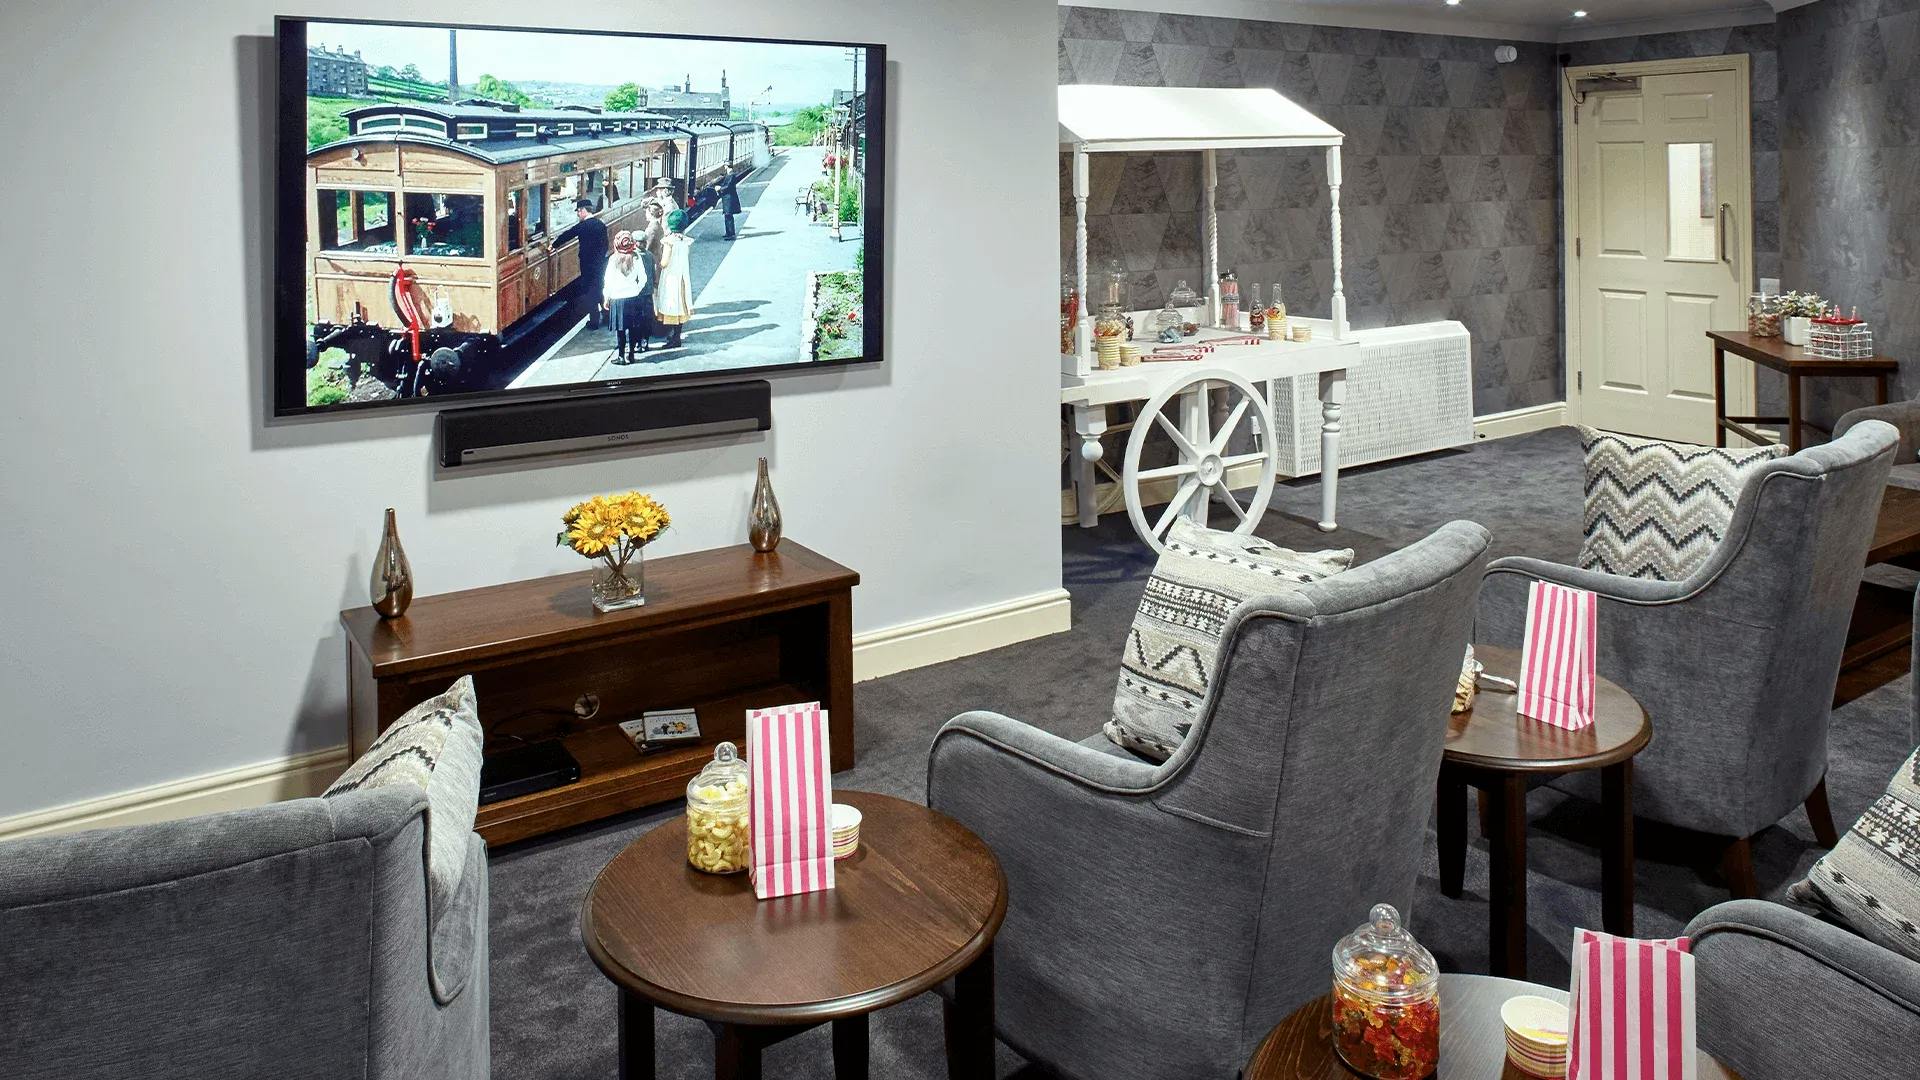 Cinema at Priory Court Care Home in Stamford, South Kesteven 